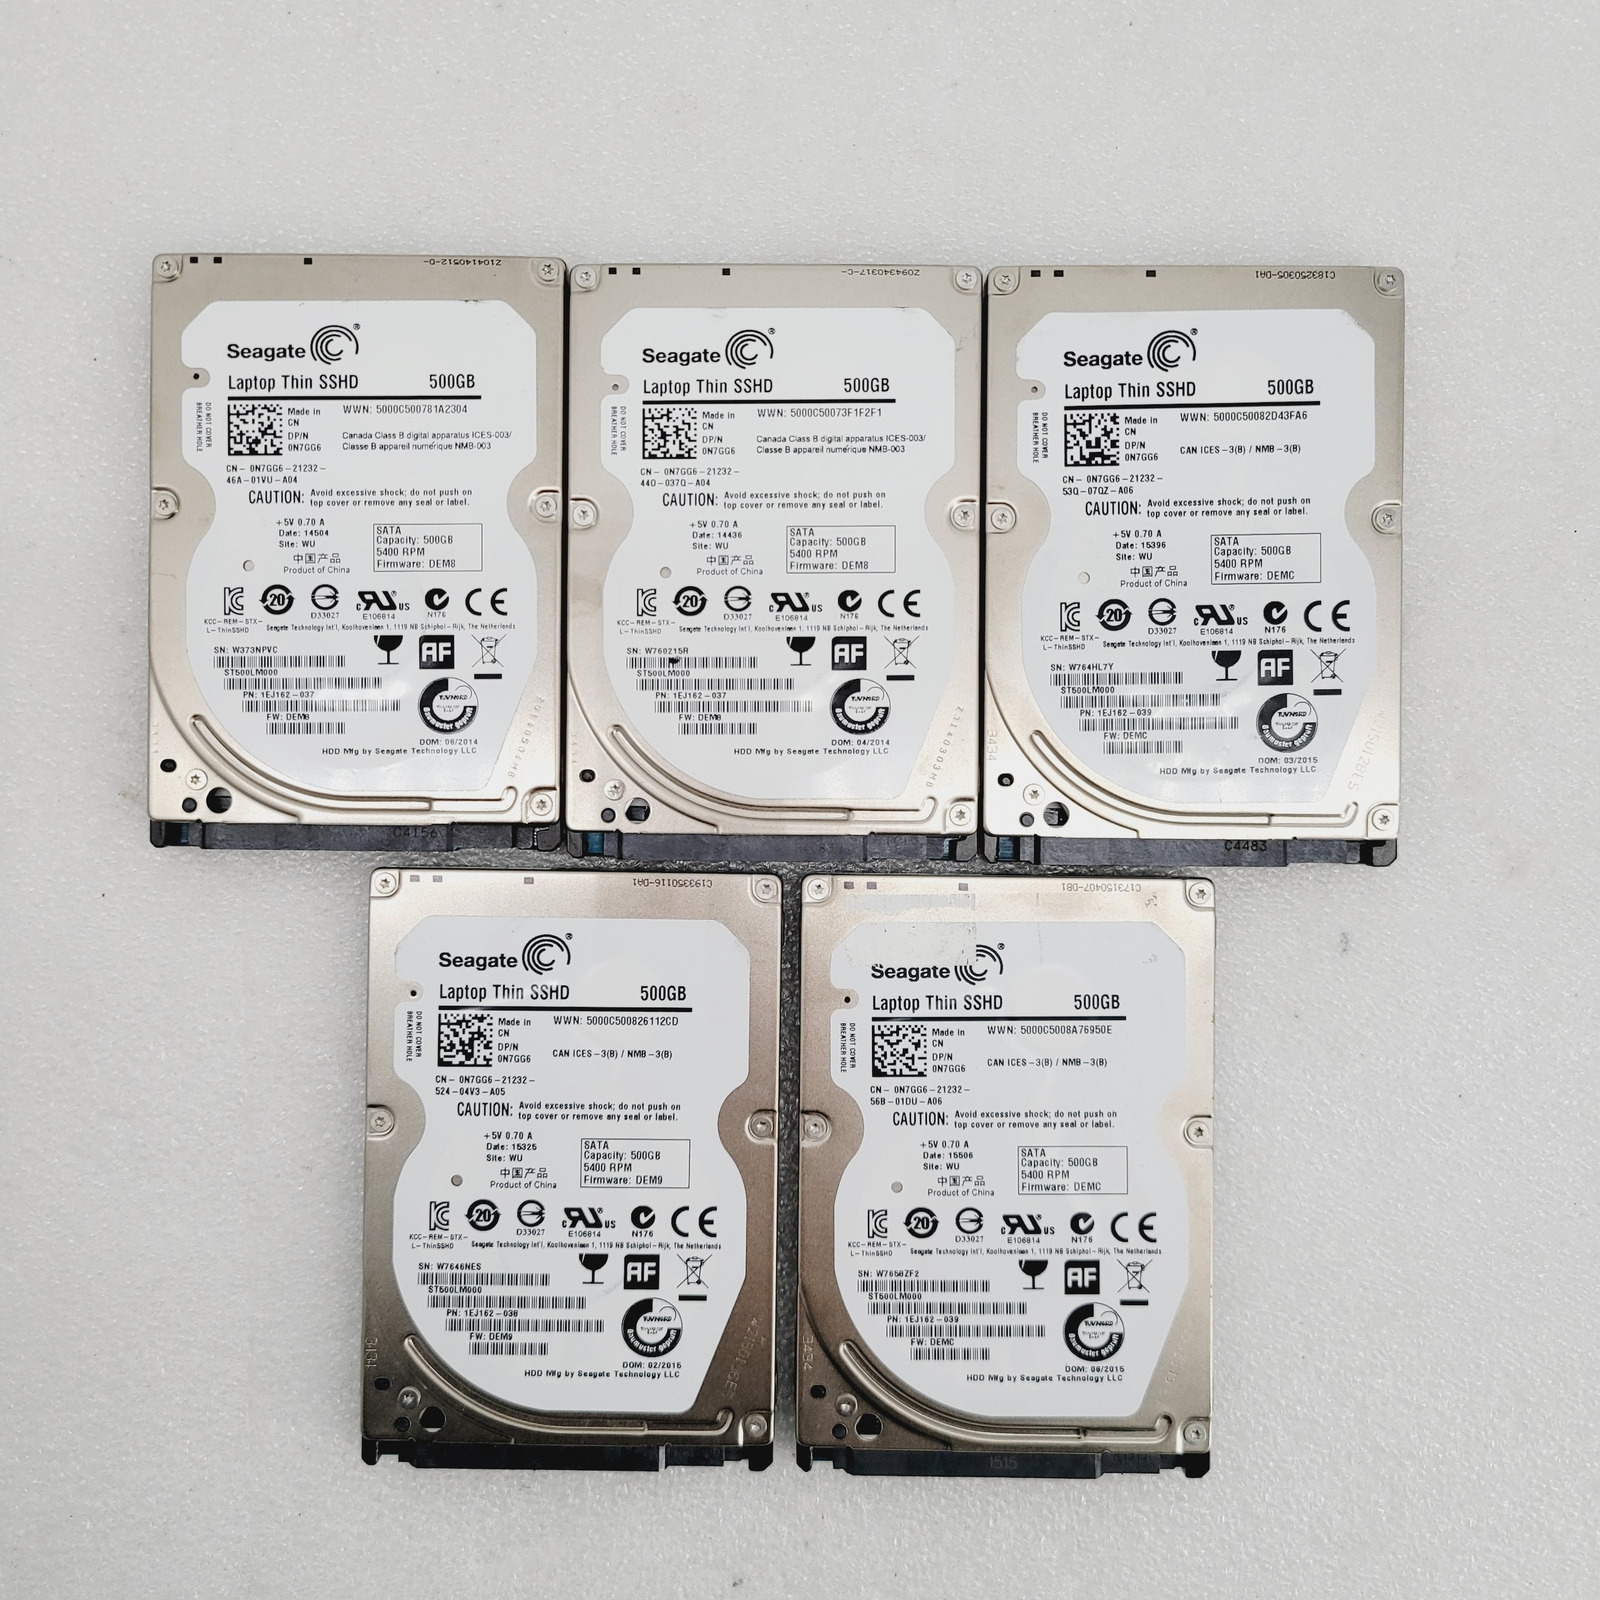 Lot of 5 HDD - 500GB Seagate Laptop Thin SSHD 5400RPM 0N7GG6 - ST500LM000